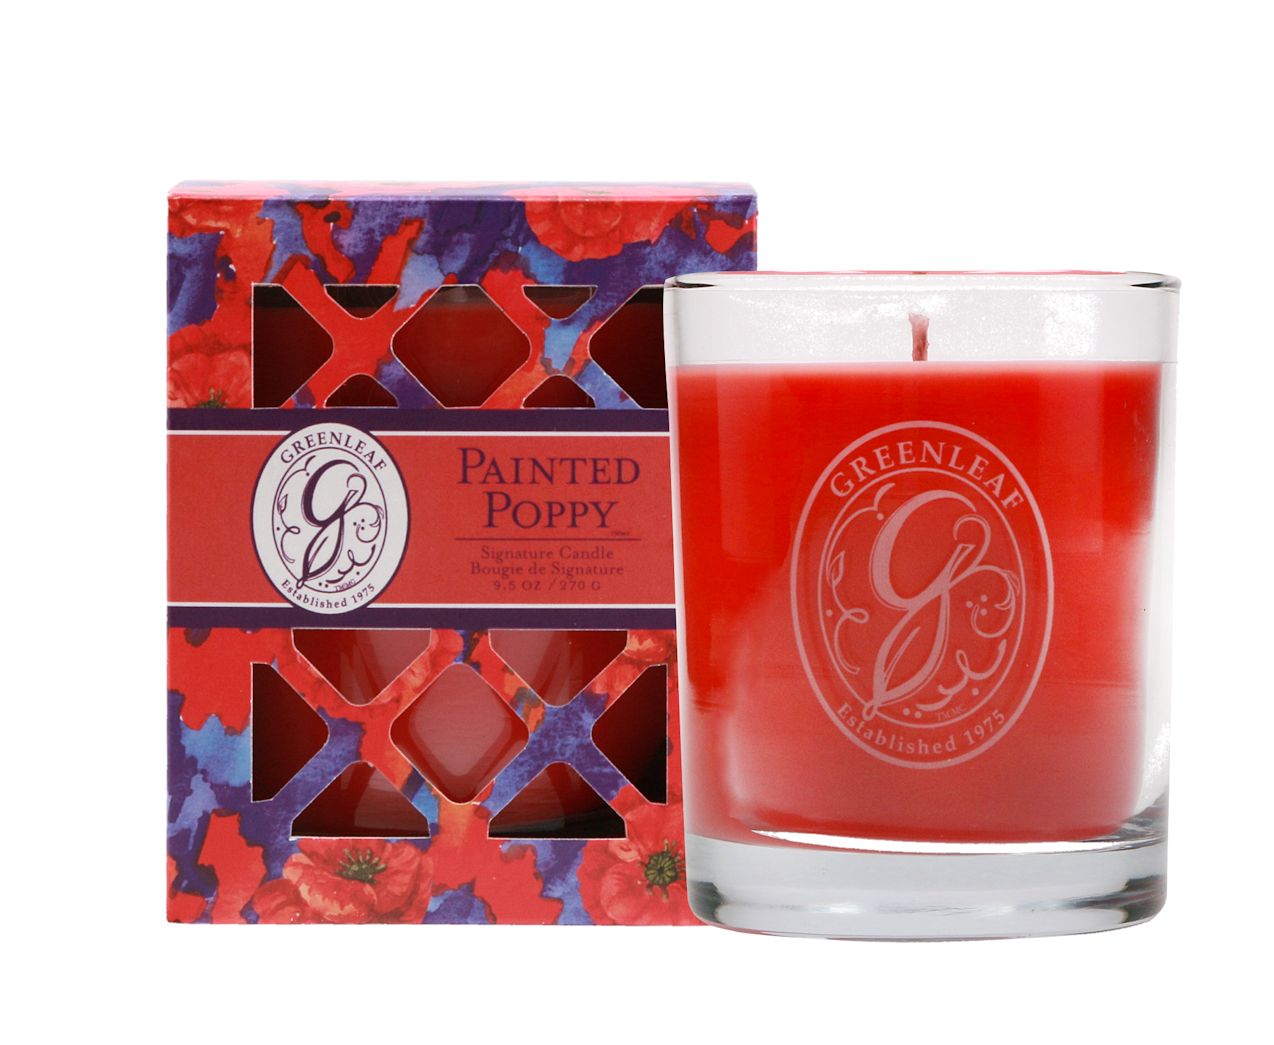 PAINTED POPPY Greenleaf Signature Scented Candle